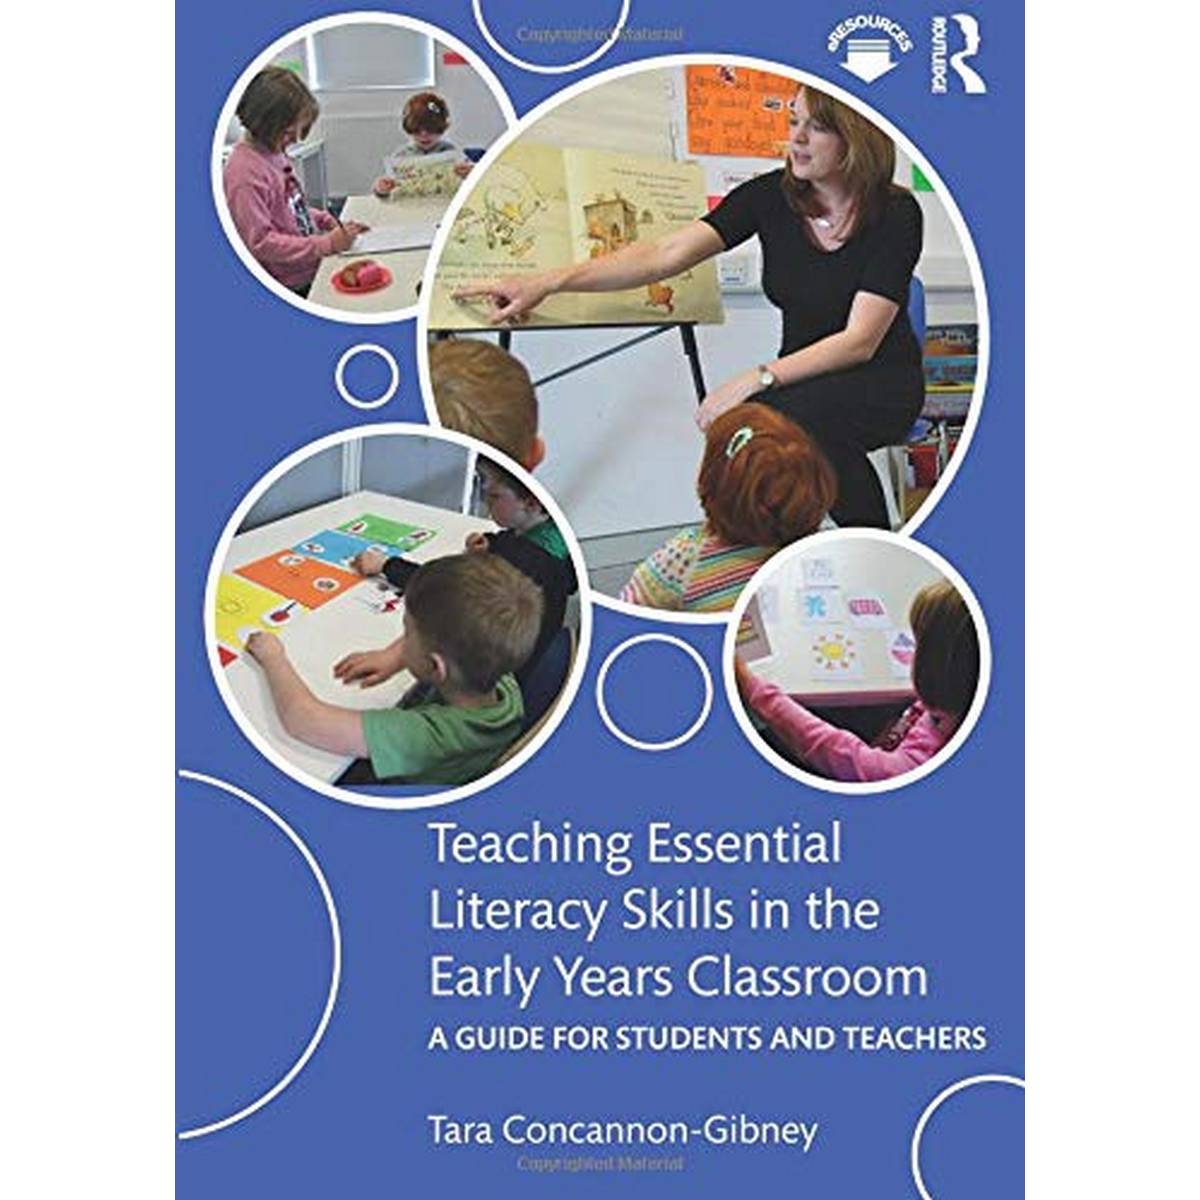 Teaching Essential Literacy Skills in the Early Years Classroom